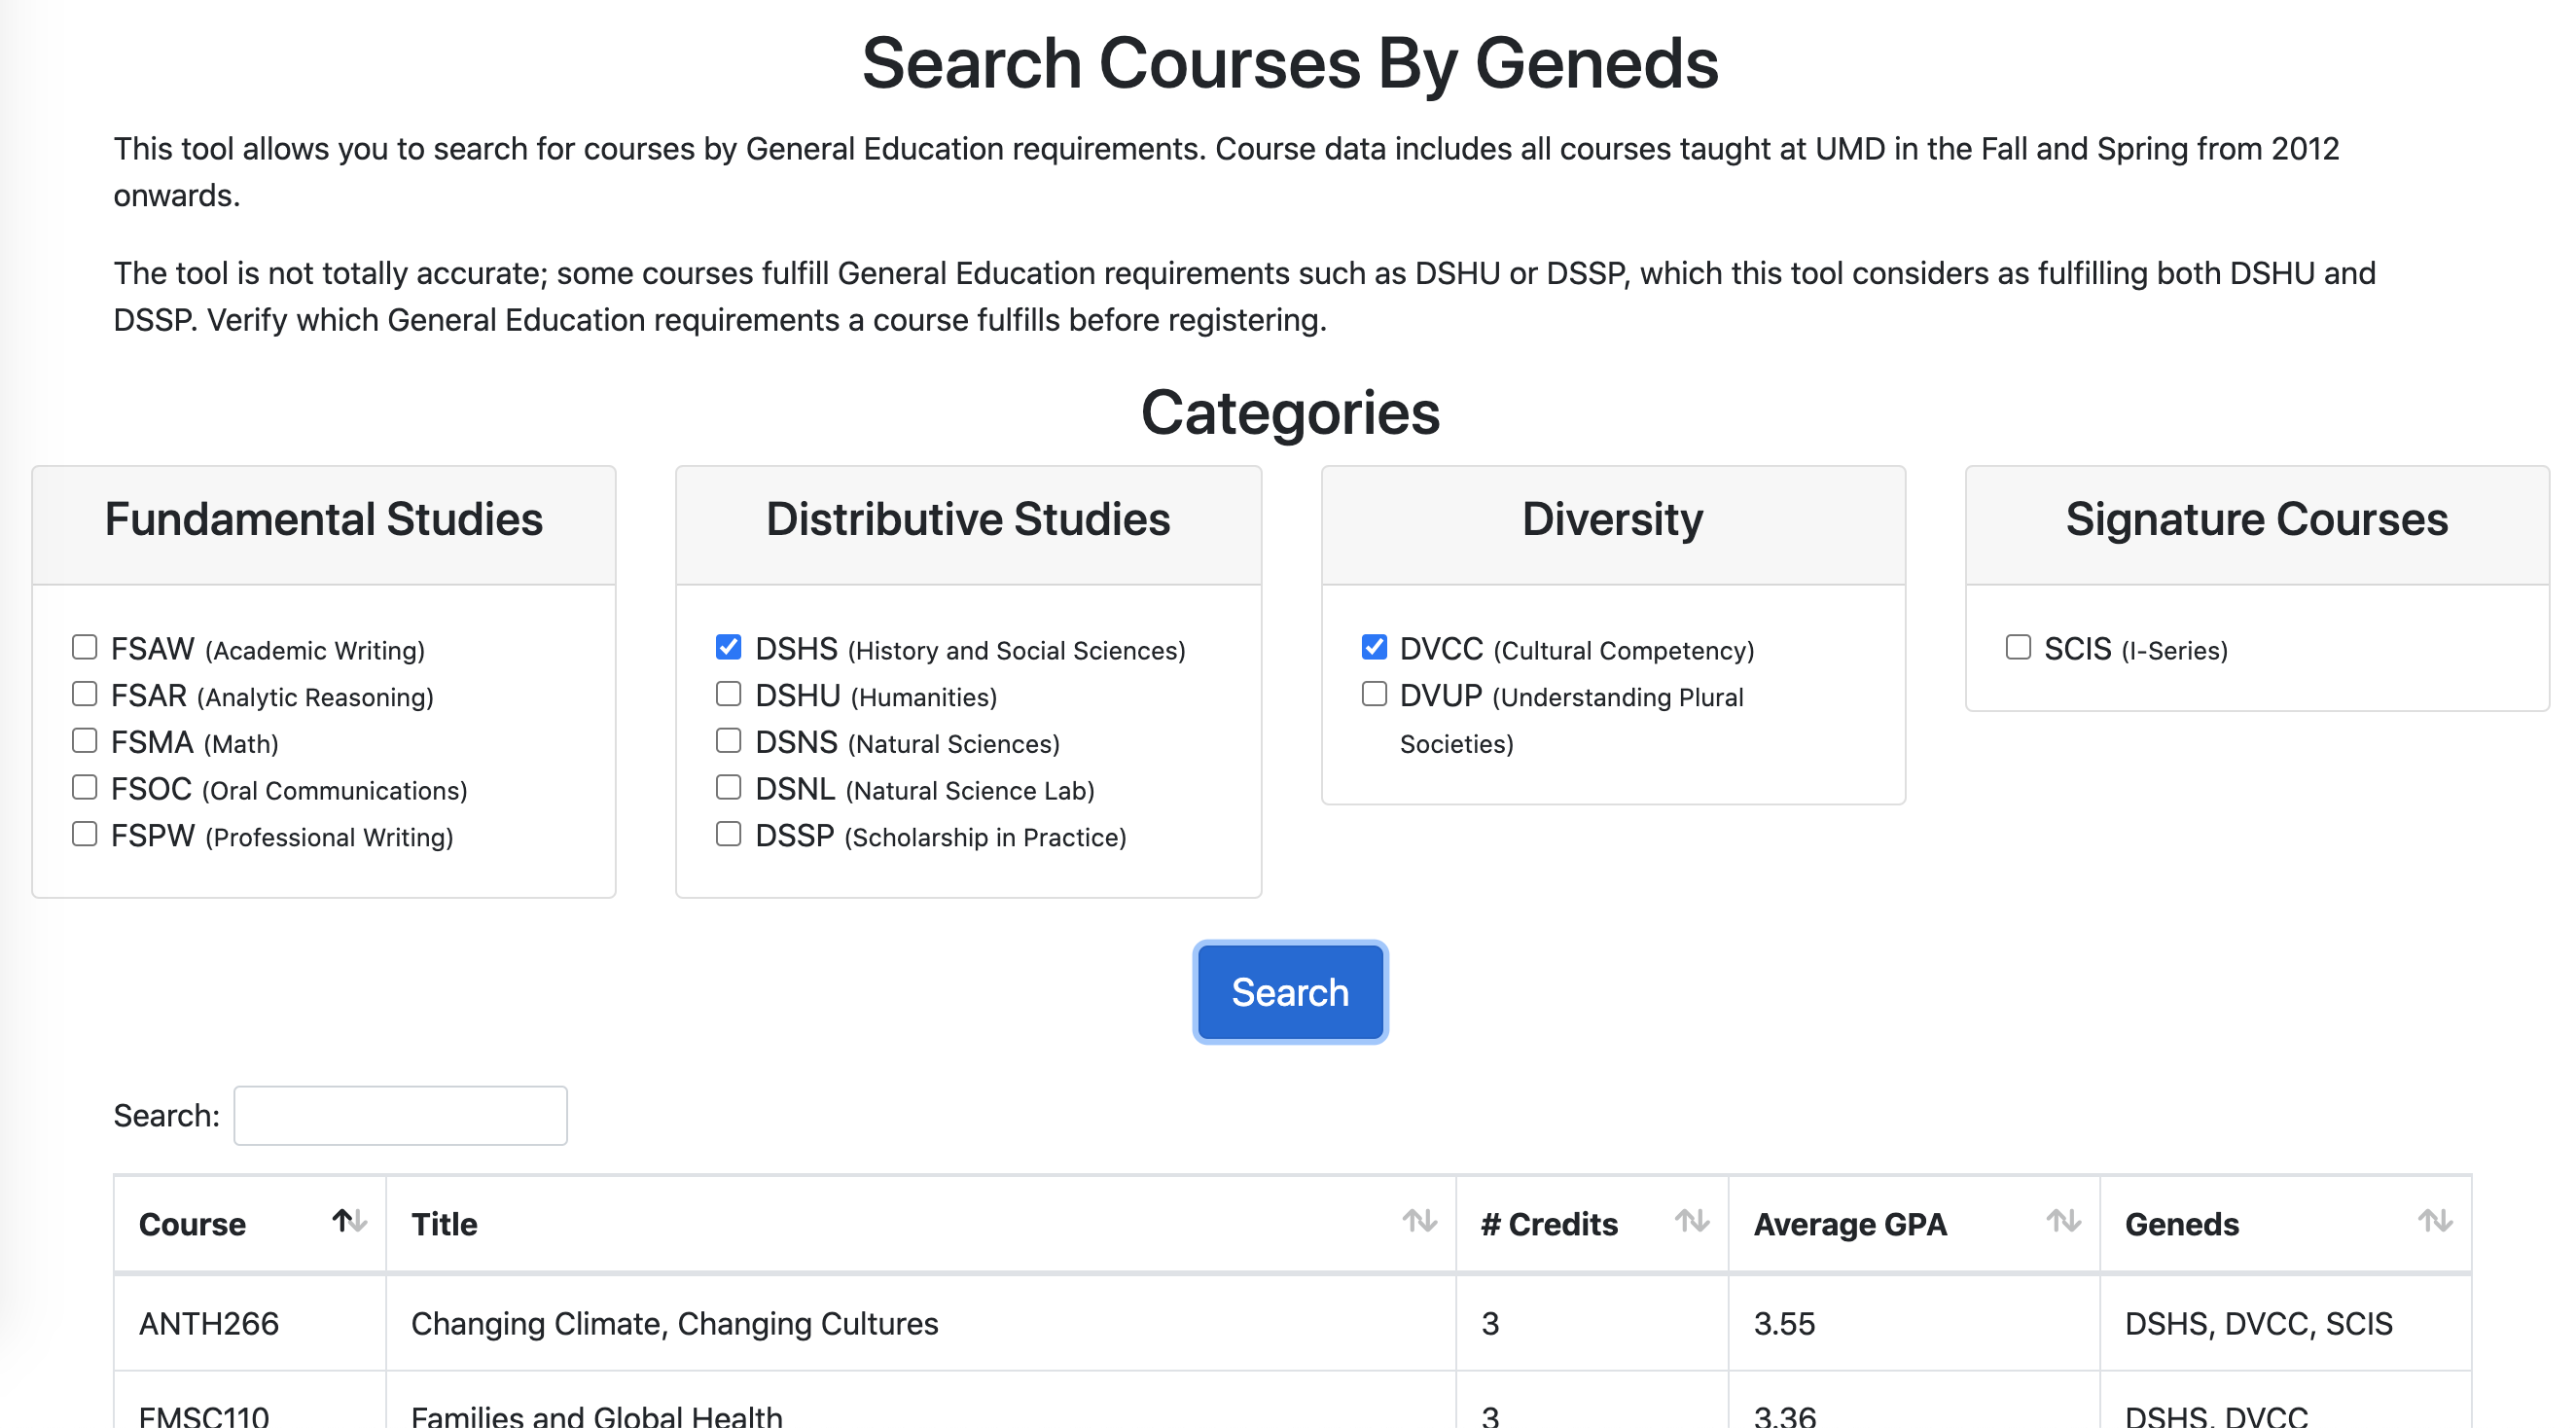 A screenshot of a page titled "Search Courses By General Education Requirements". The page contains checkboxes of a list of general education requirements, such as DSHS (History and Social Sciences). Toward the bottom of the page a table can be seen listing courses, course titles, number of credits, and average GPAs. For example, the title of ANTH265 is Anthropology of Global Health, it is 3 credits, and it has an average GPA of 3.62.